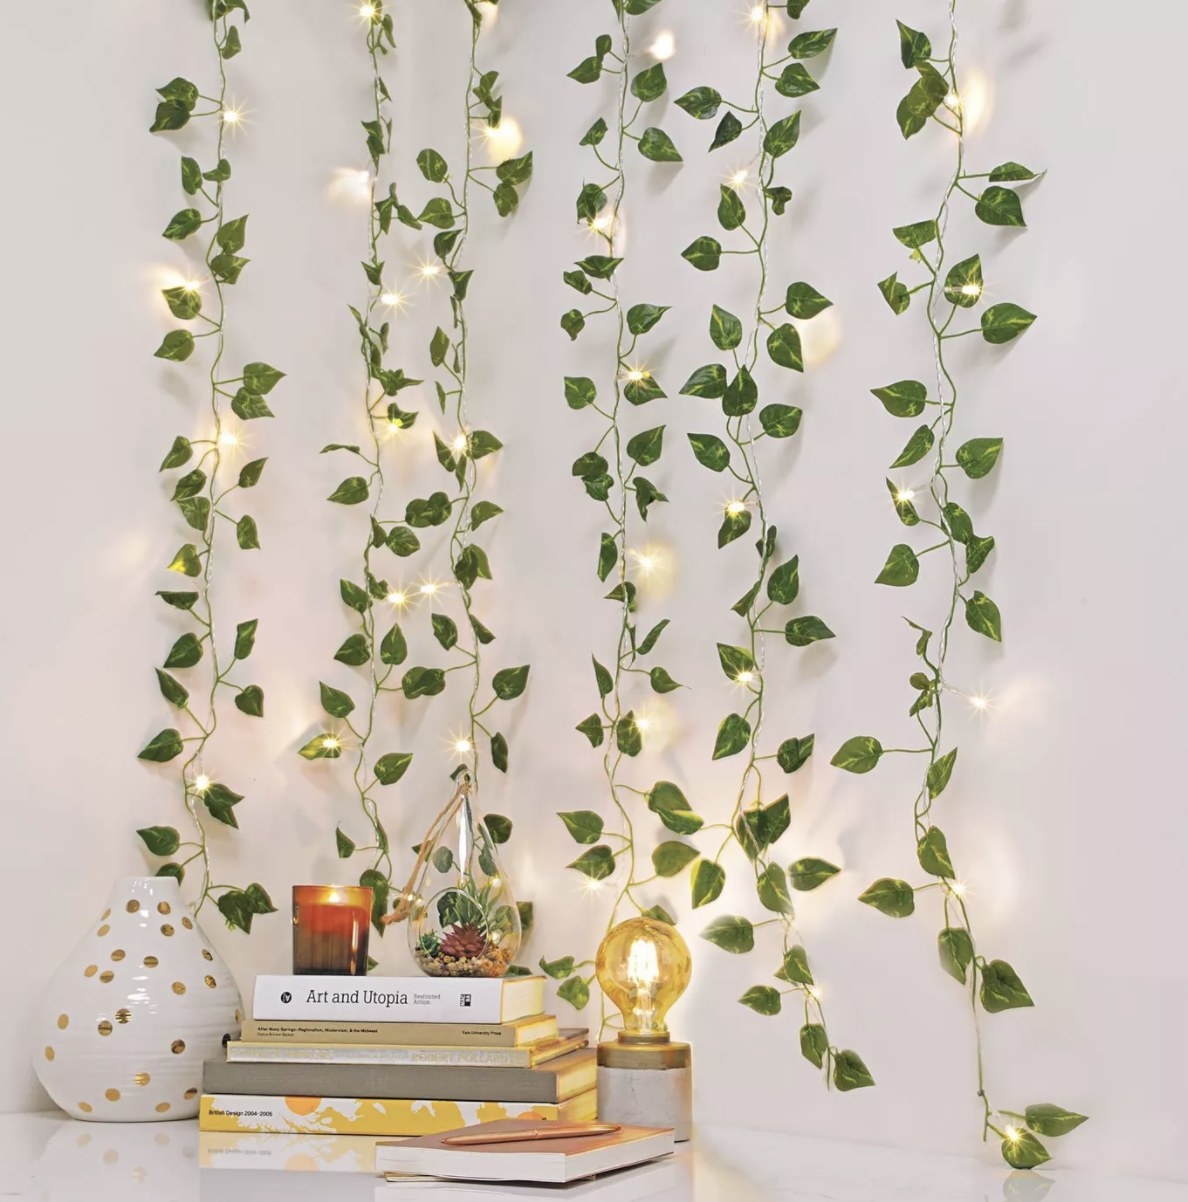 There are six hanging strings of lighted vines in a white room